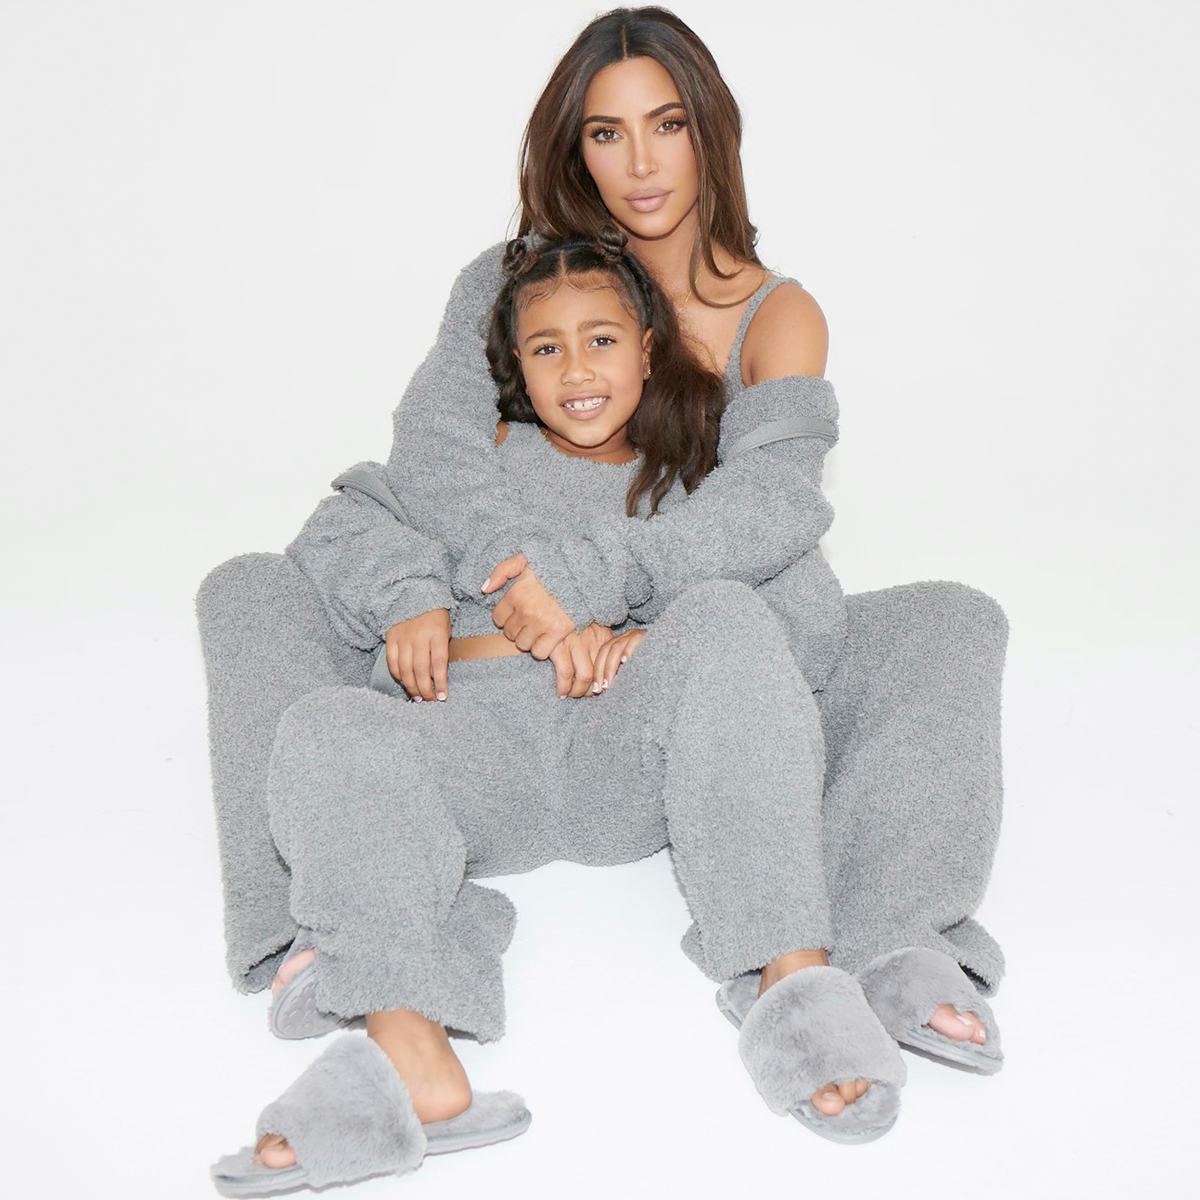 Skims Has the Coziest New Mommy and Me Loungewear